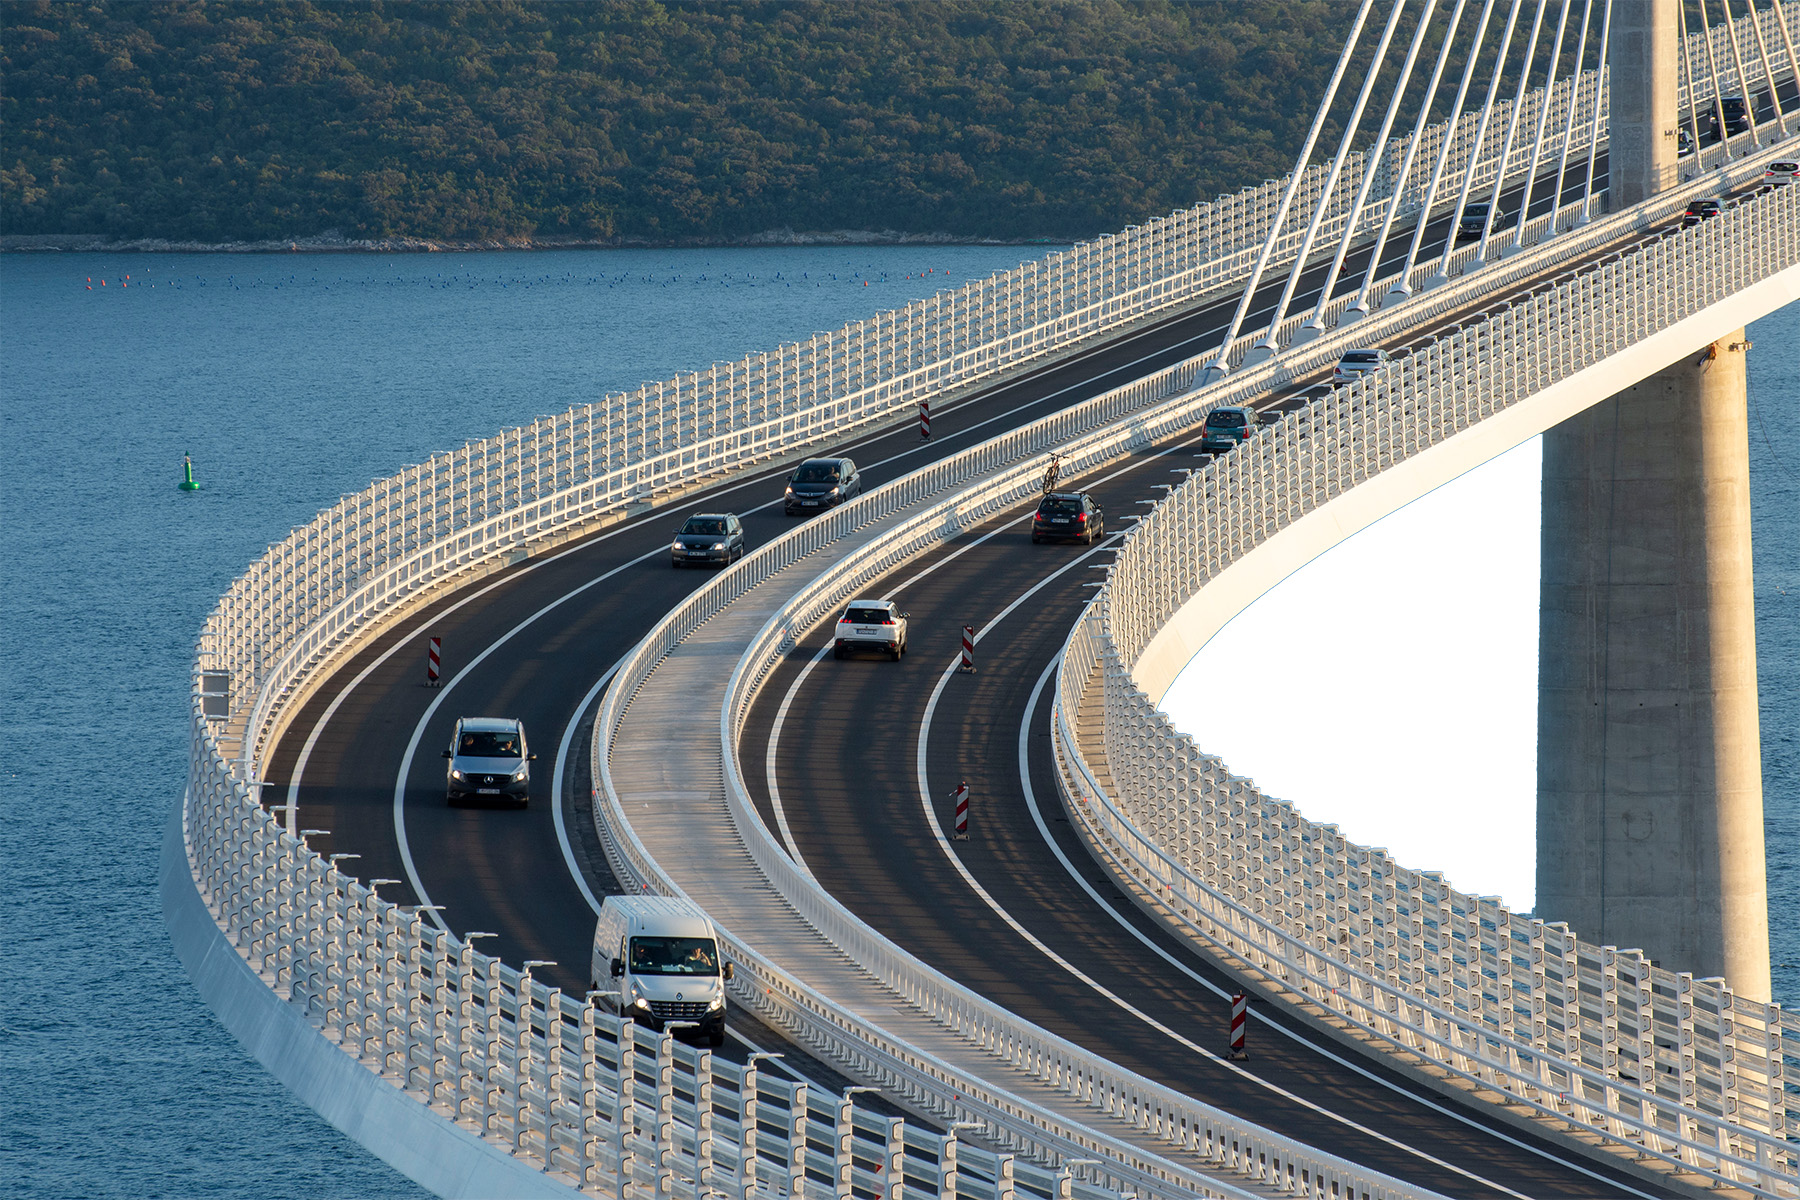 Cars cross the bridge, traveling on a curved section close to the channel shore. 